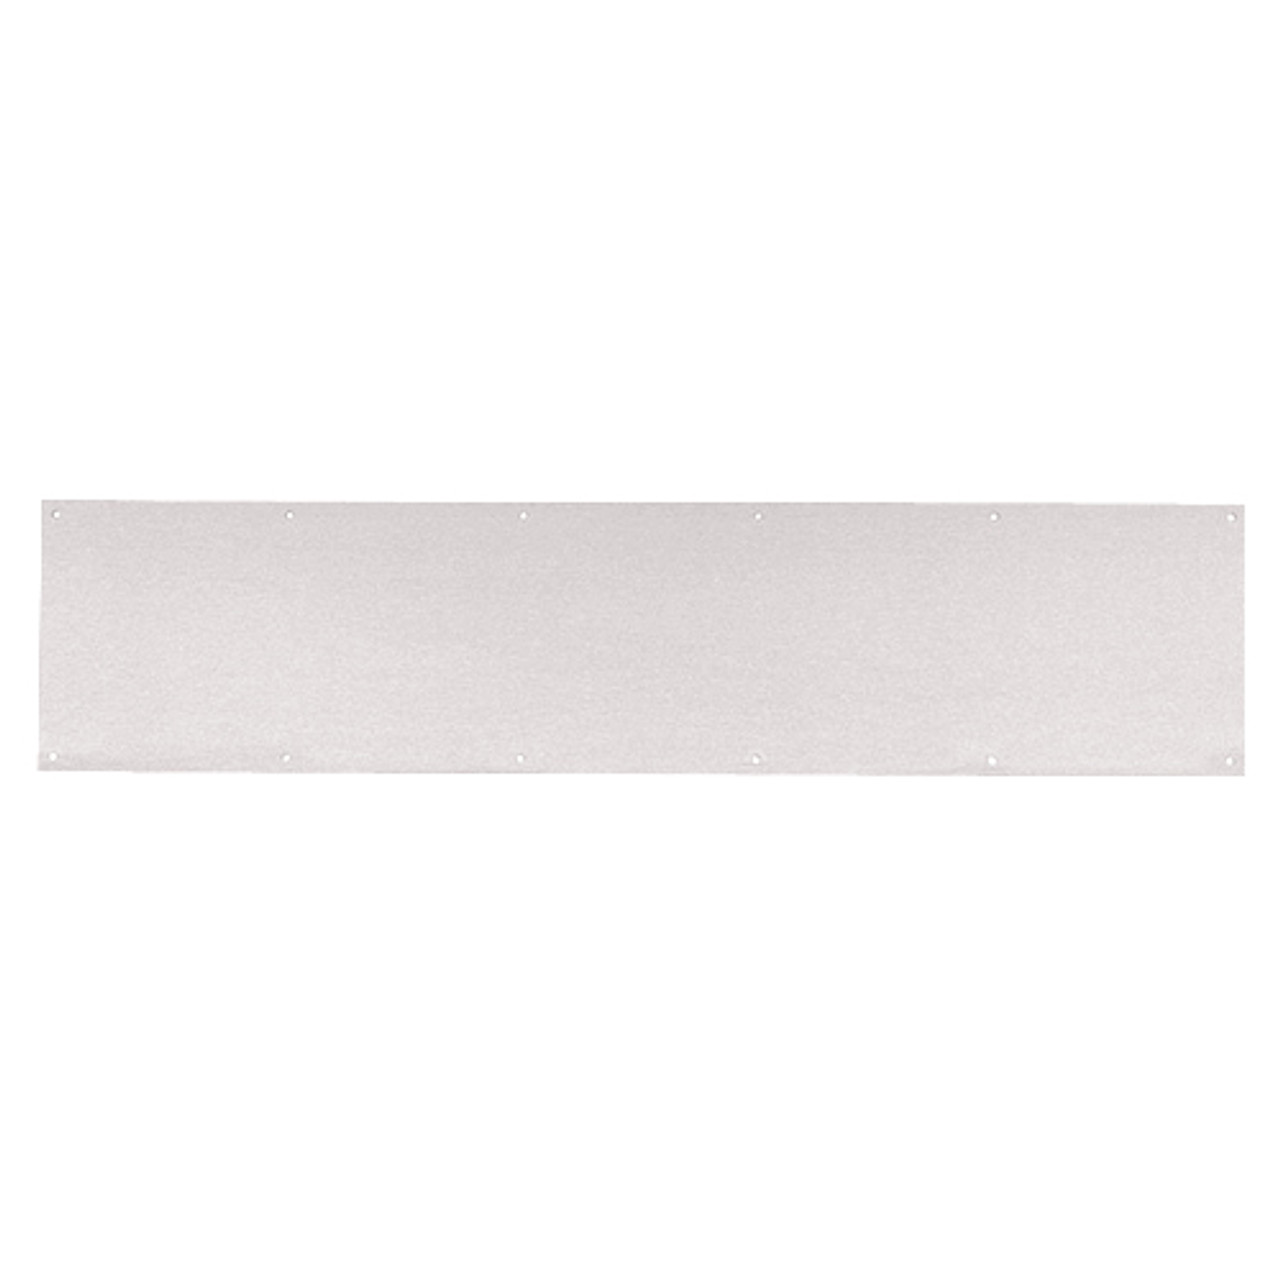 8400-US32-34x34-B-CS Ives 8400 Series Protection Plate in Bright Stainless Steel